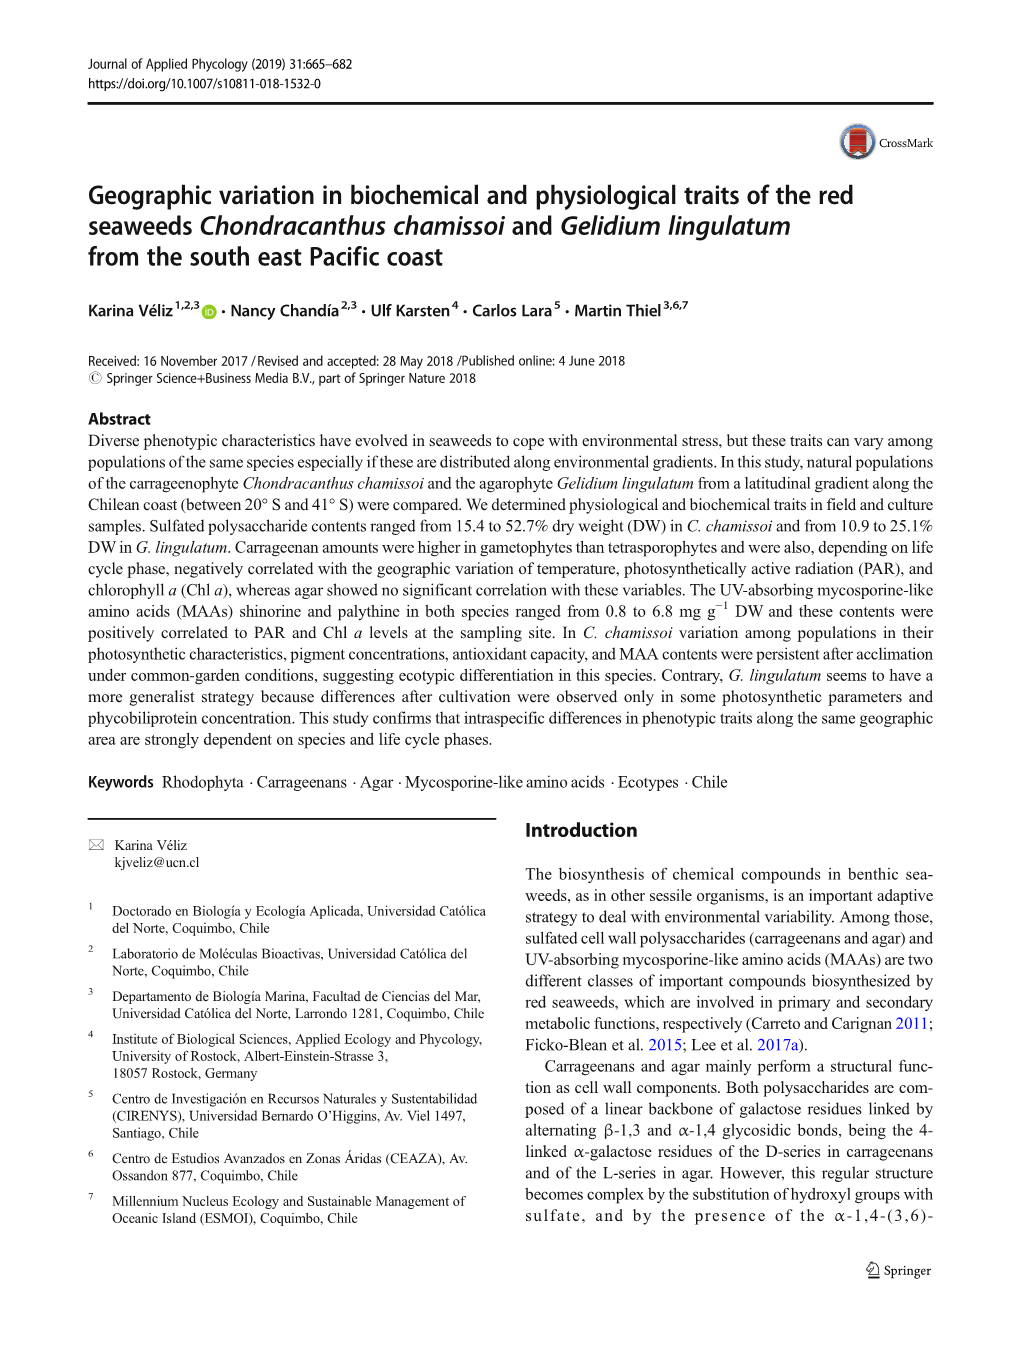 Geographic Variation in Biochemical and Physiological Traits of the Red Seaweeds Chondracanthus Chamissoi and Gelidium Lingulatum from the South East Pacific Coast